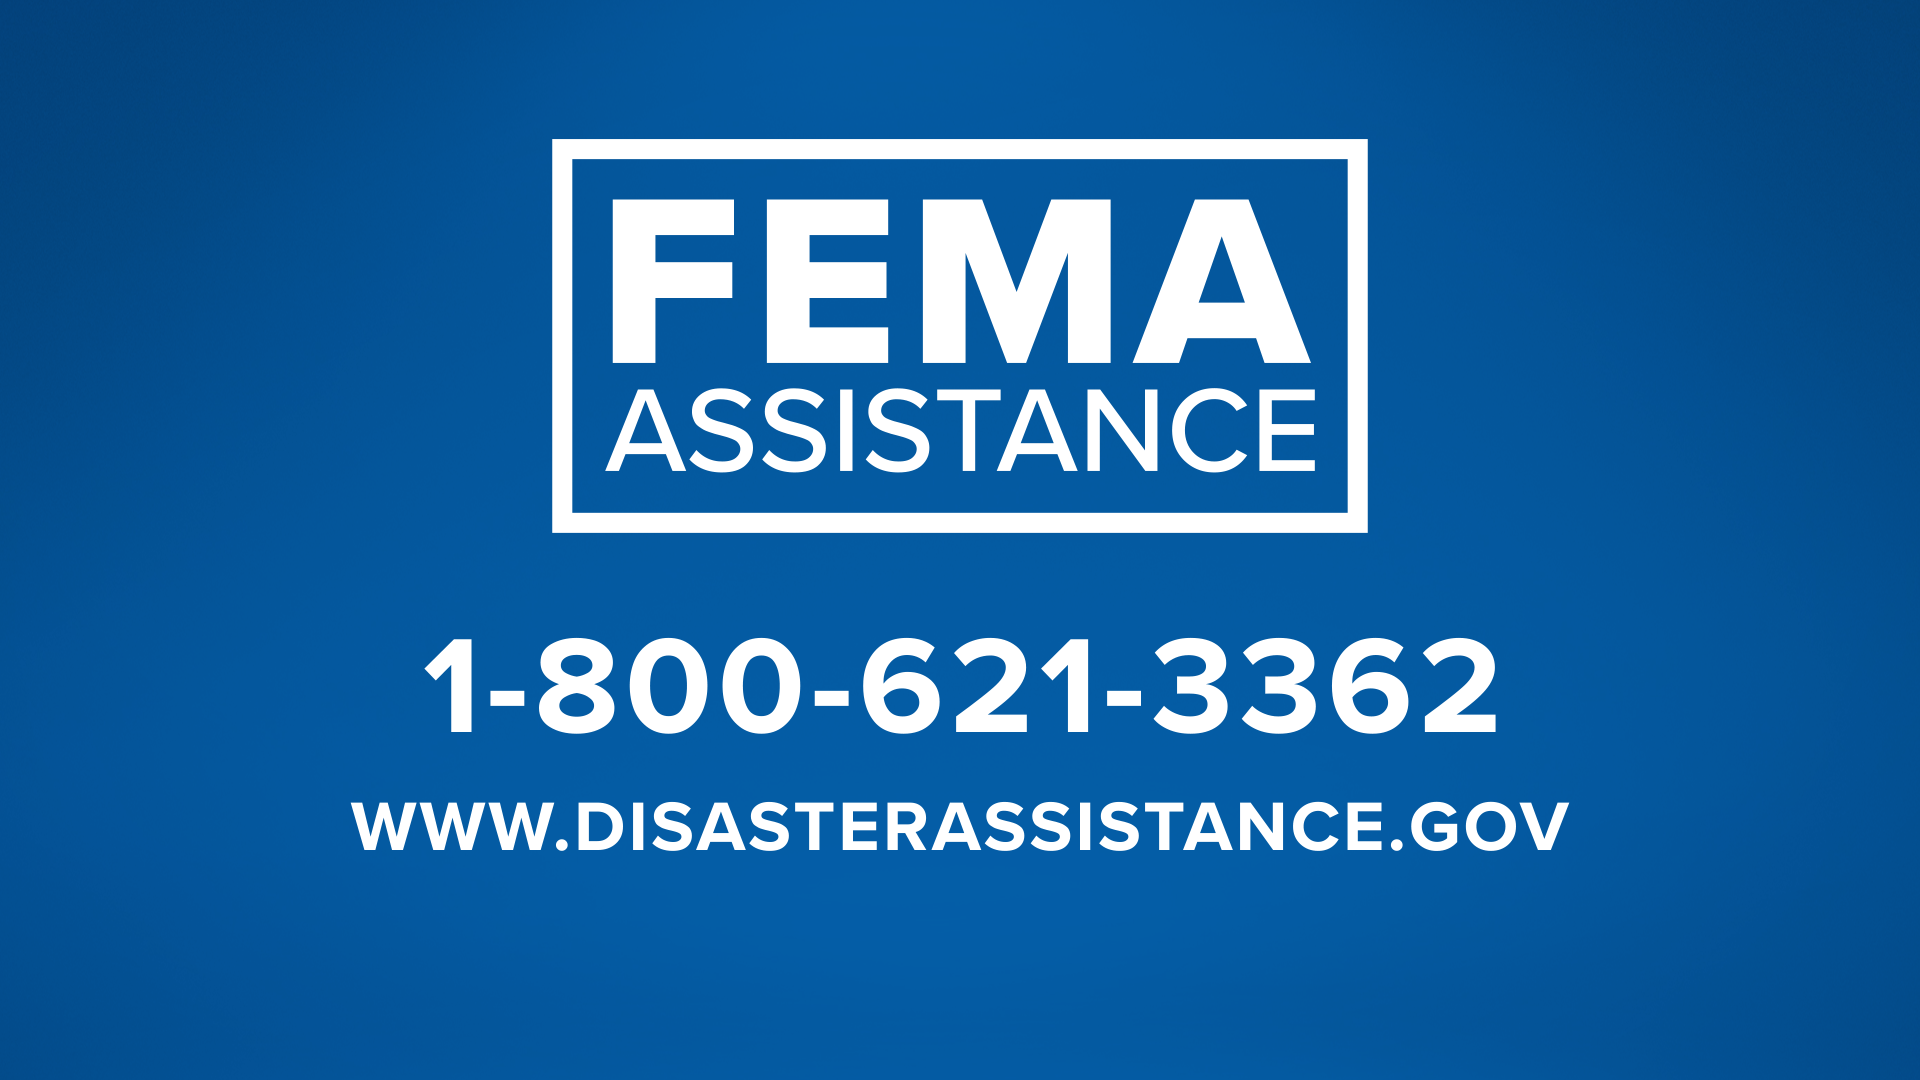 People in 77 Texas counties can now apply for disaster relief with FEMA. Here is how they can help, and how you can get started.